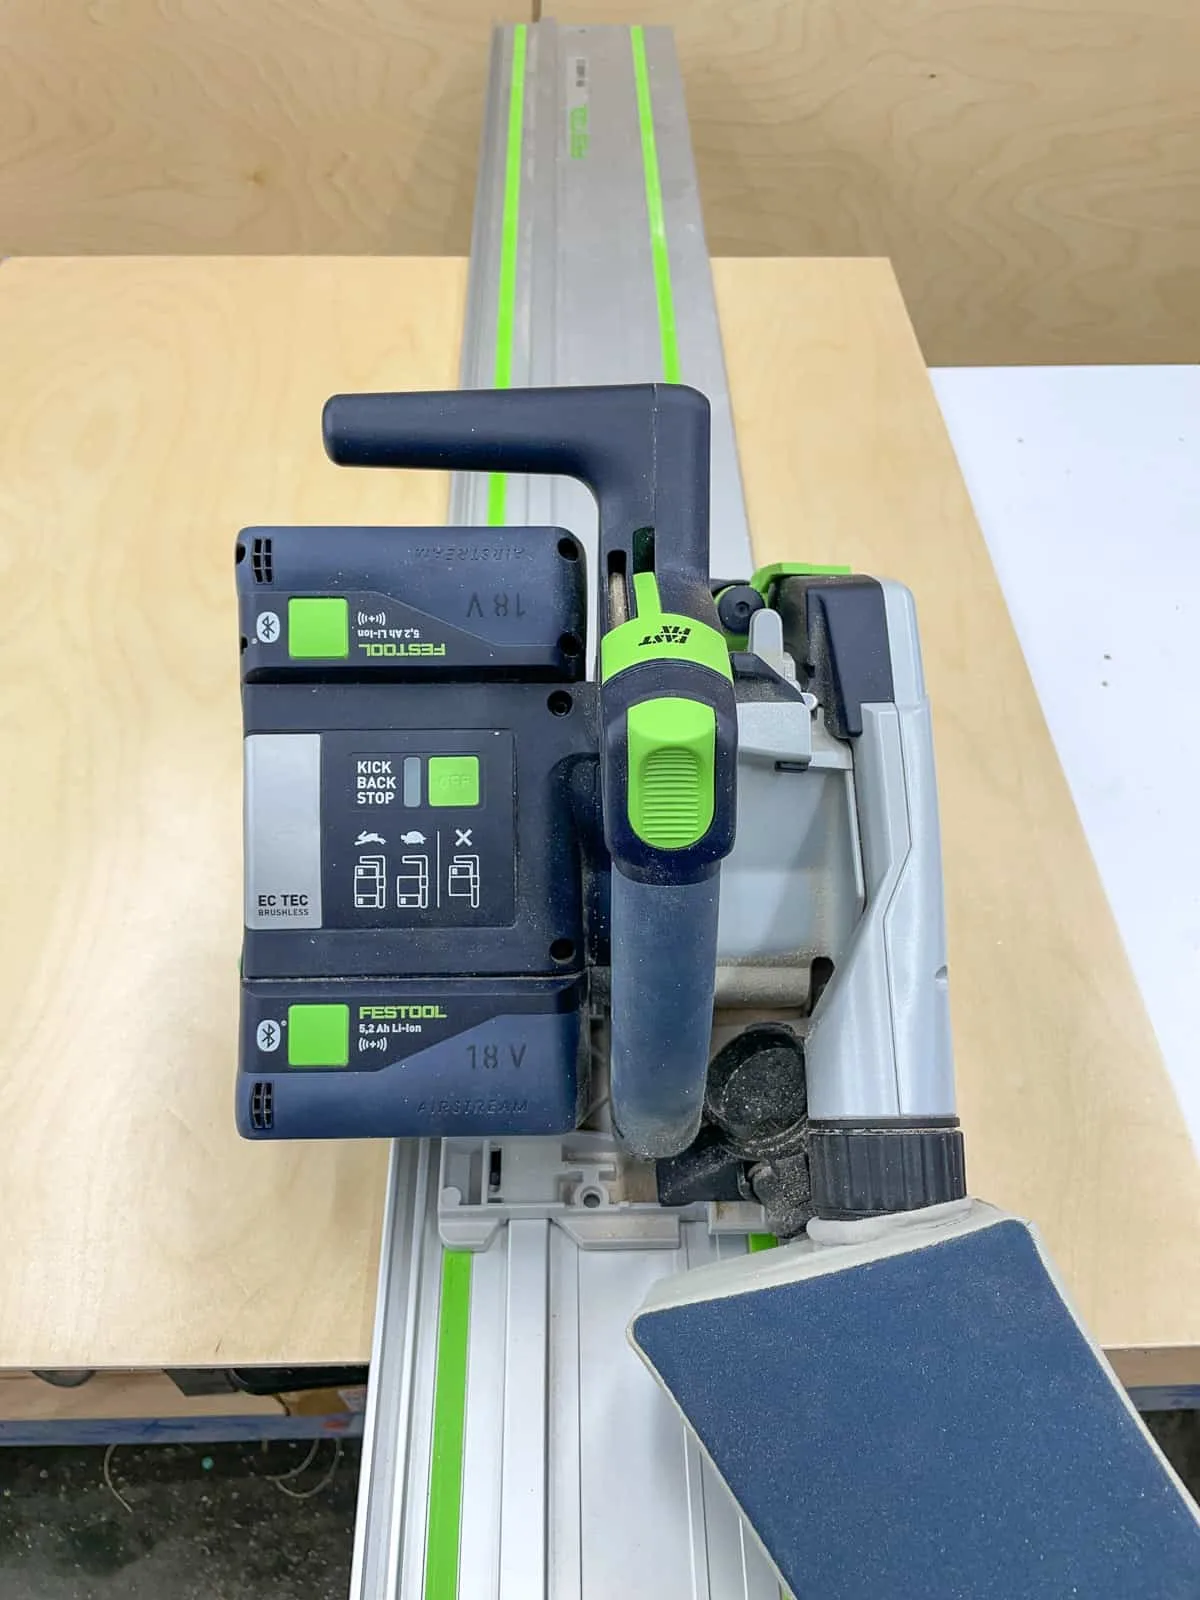 Festool track saw with track on plywood sheet before cutting cabinet box pieces